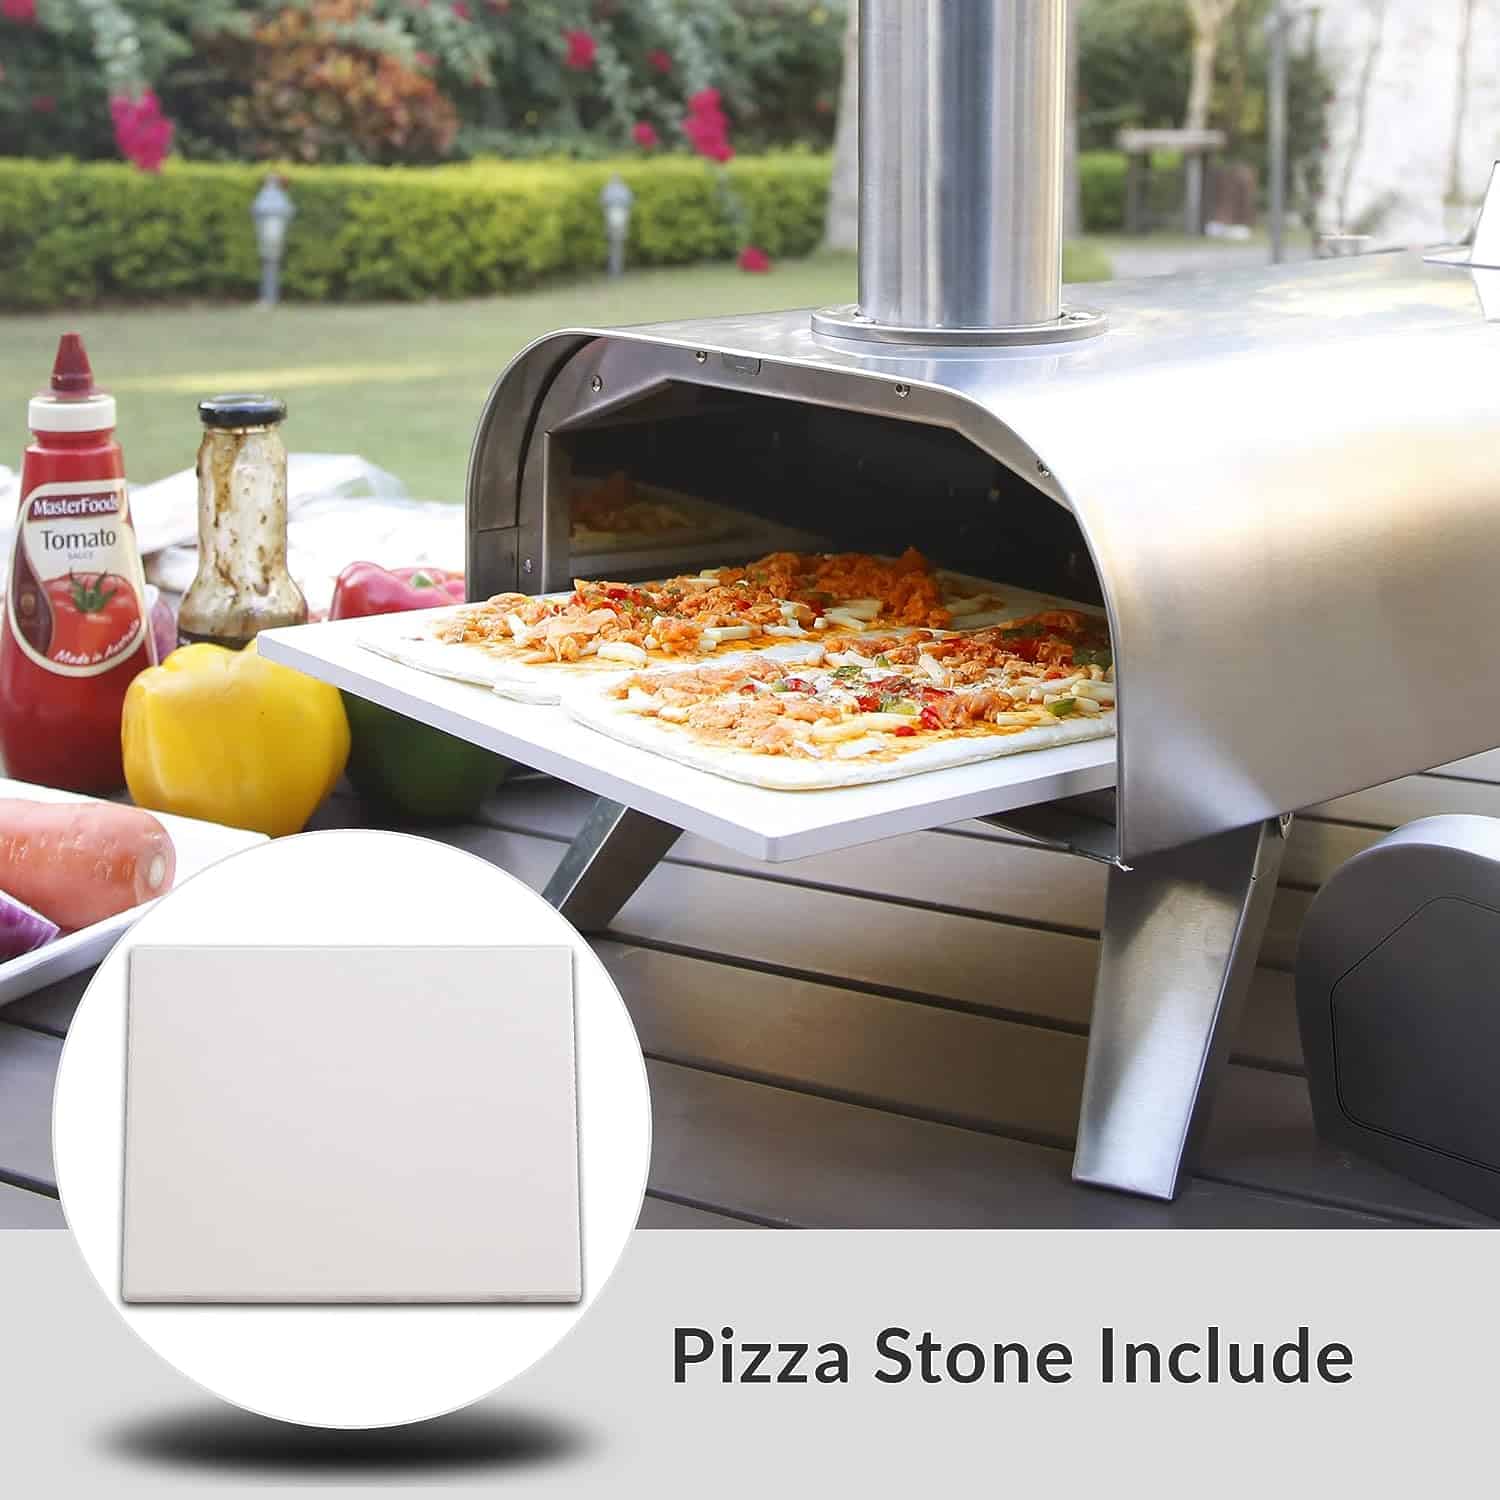 BIG HORN OUTDOORS 12 Inch Wood Pellet Burning Pizza Oven, Portable Stainless Steel Pizza Grill with Pizza Stone for Outside 4